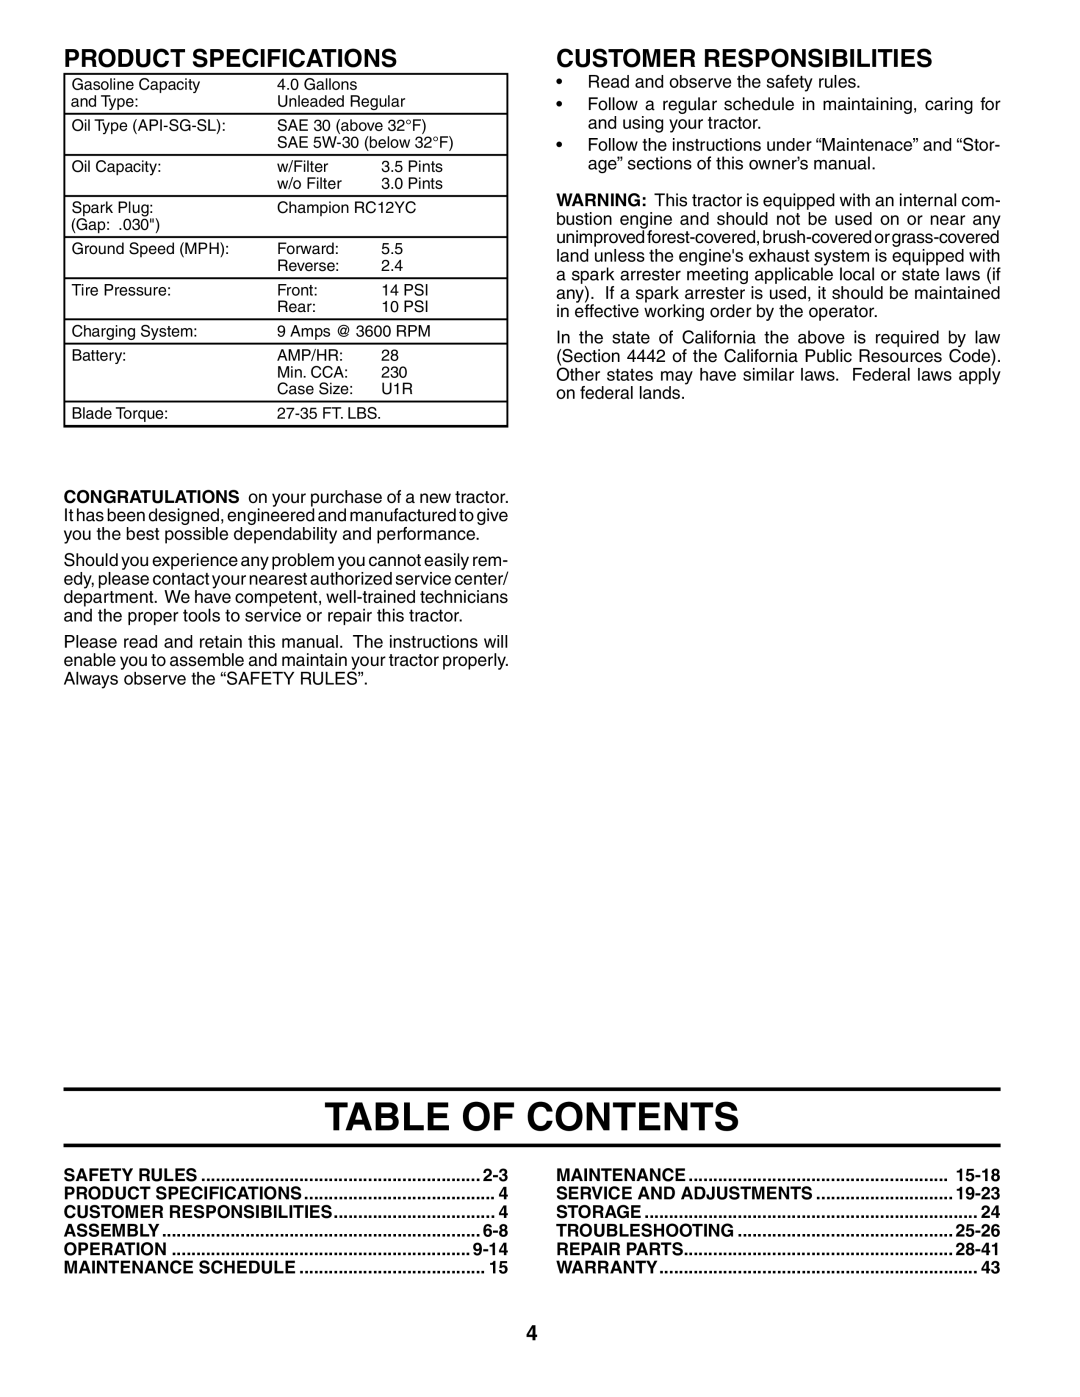 Husqvarna YTH18542 Table Of Contents, Product Specifications, Customer Responsibilities, 9-14, 15-18, 19-23, 25-26, 28-41 